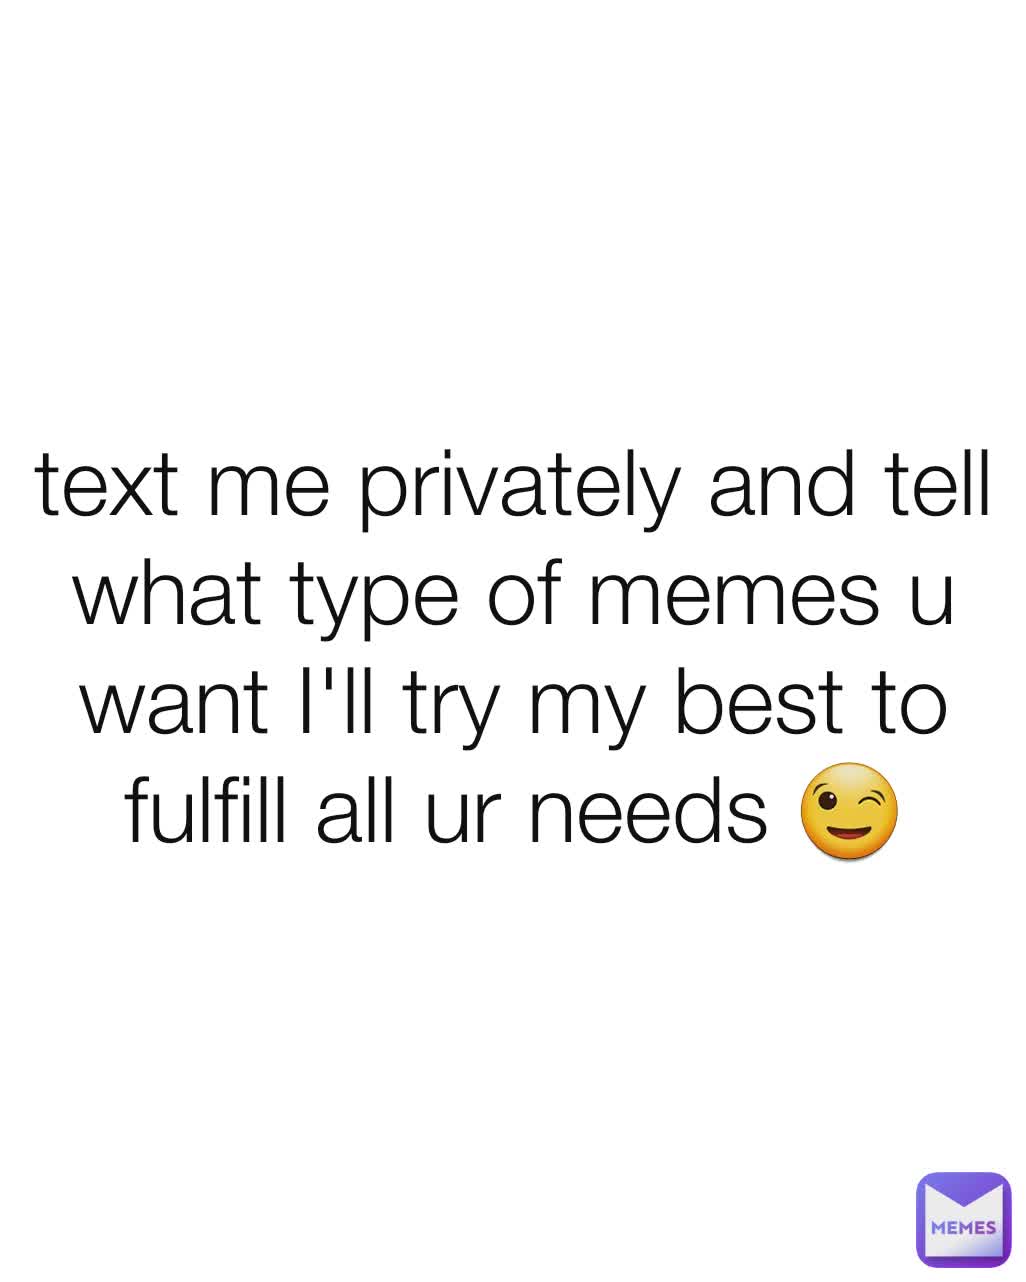 text me privately and tell what type of memes u want I'll try my best to fulfill all ur needs 😉